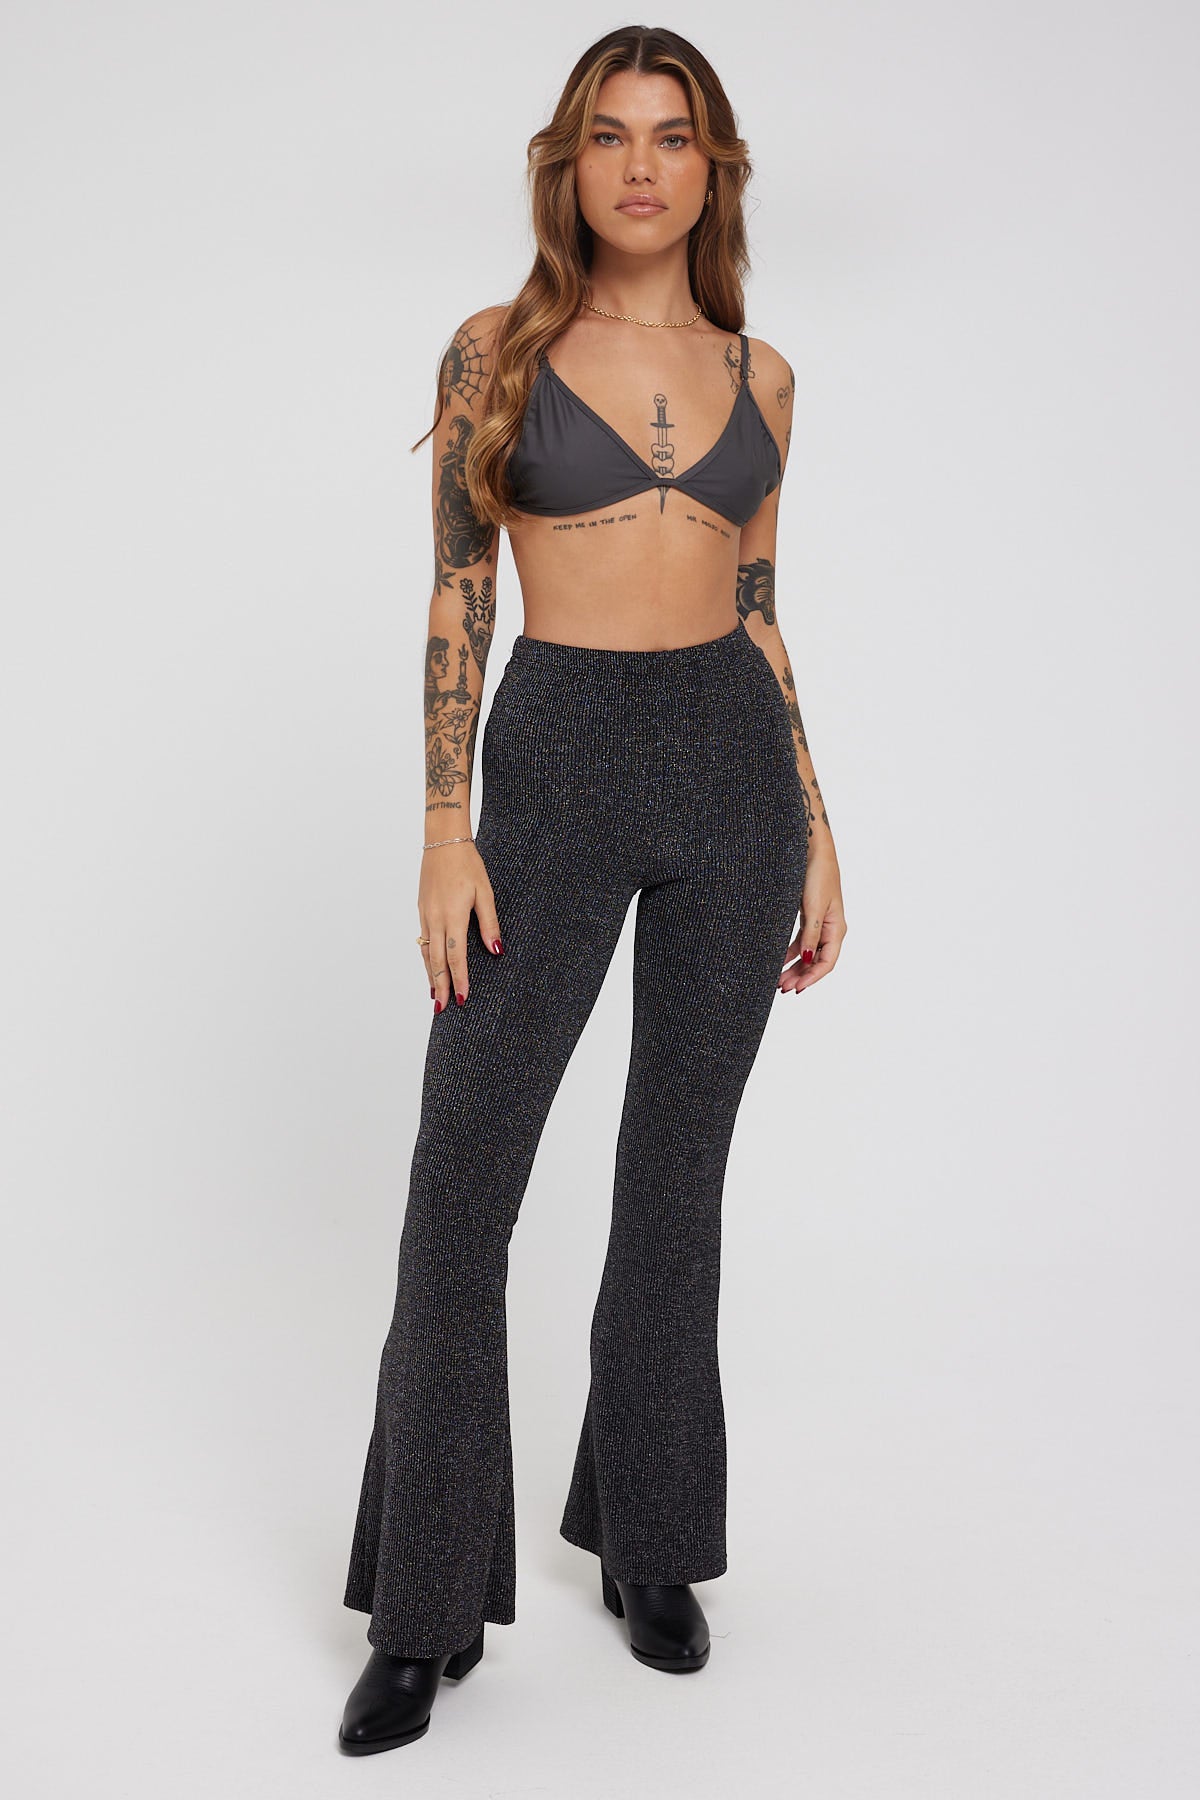 Luck & Trouble Flashy Glitter Flares Black – Universal Store